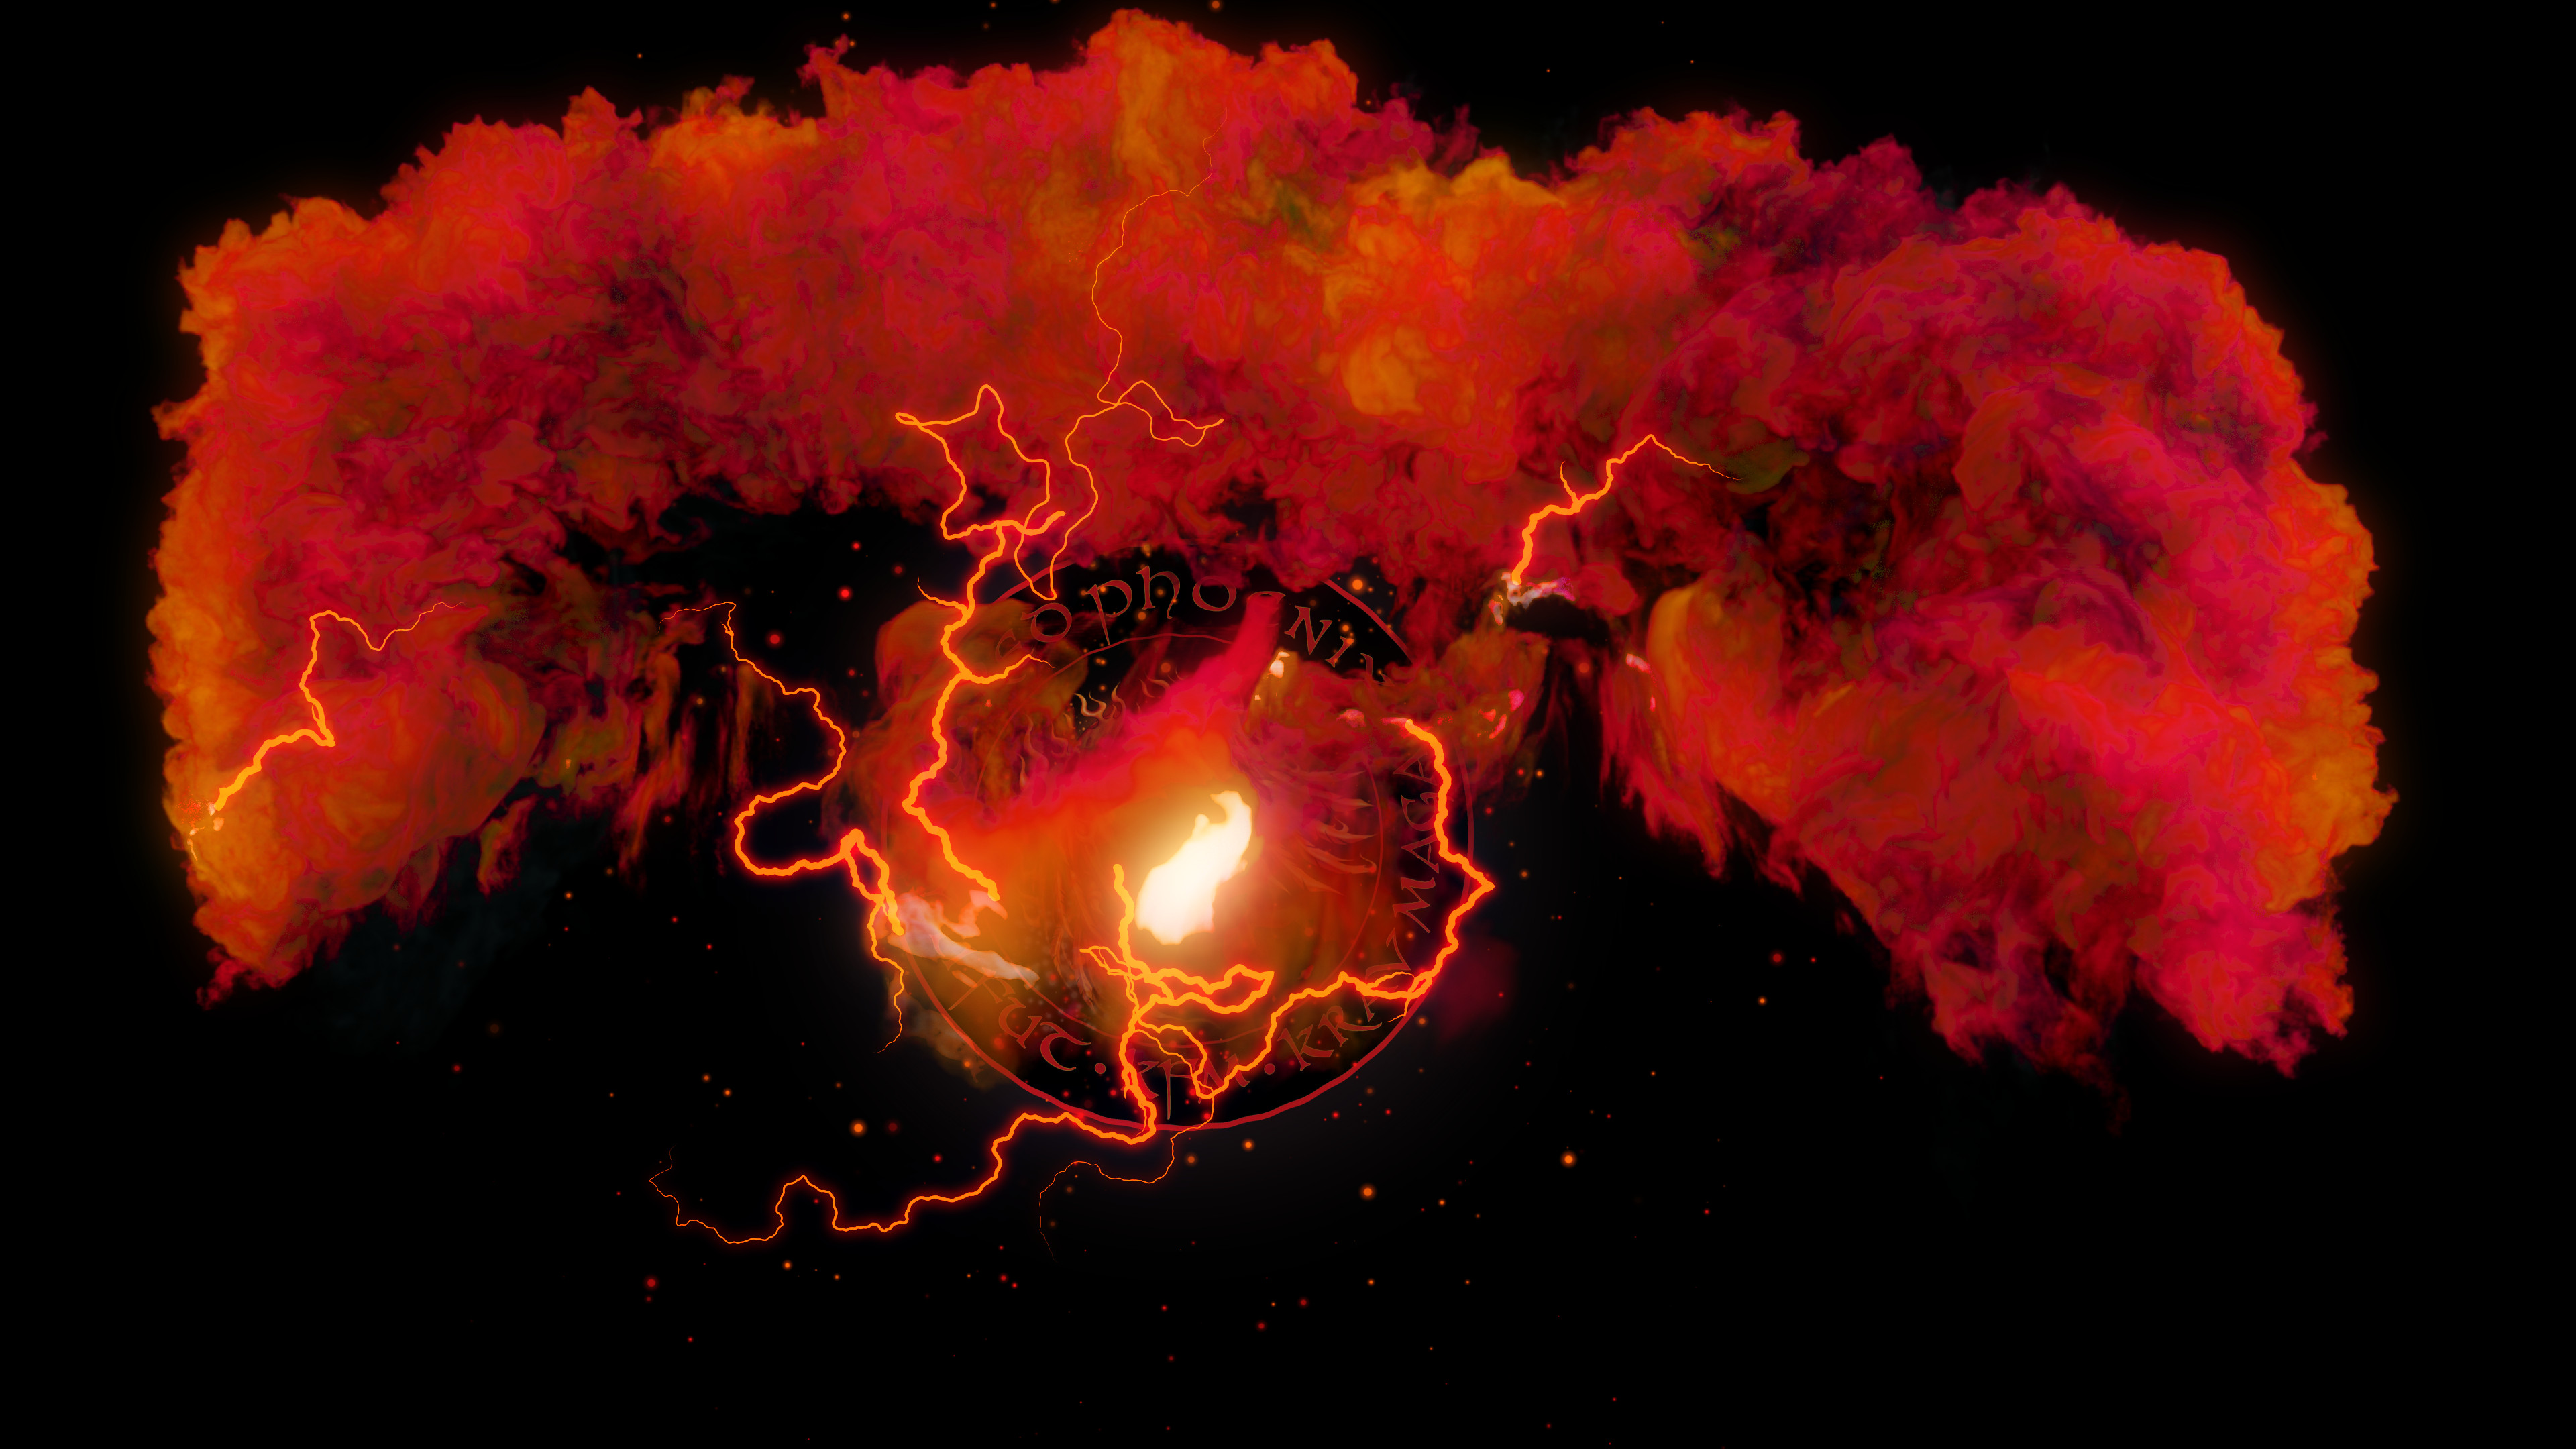 Screen shot from logo intro.  All flames/ explosions in Houdini, everything else in After Effects.